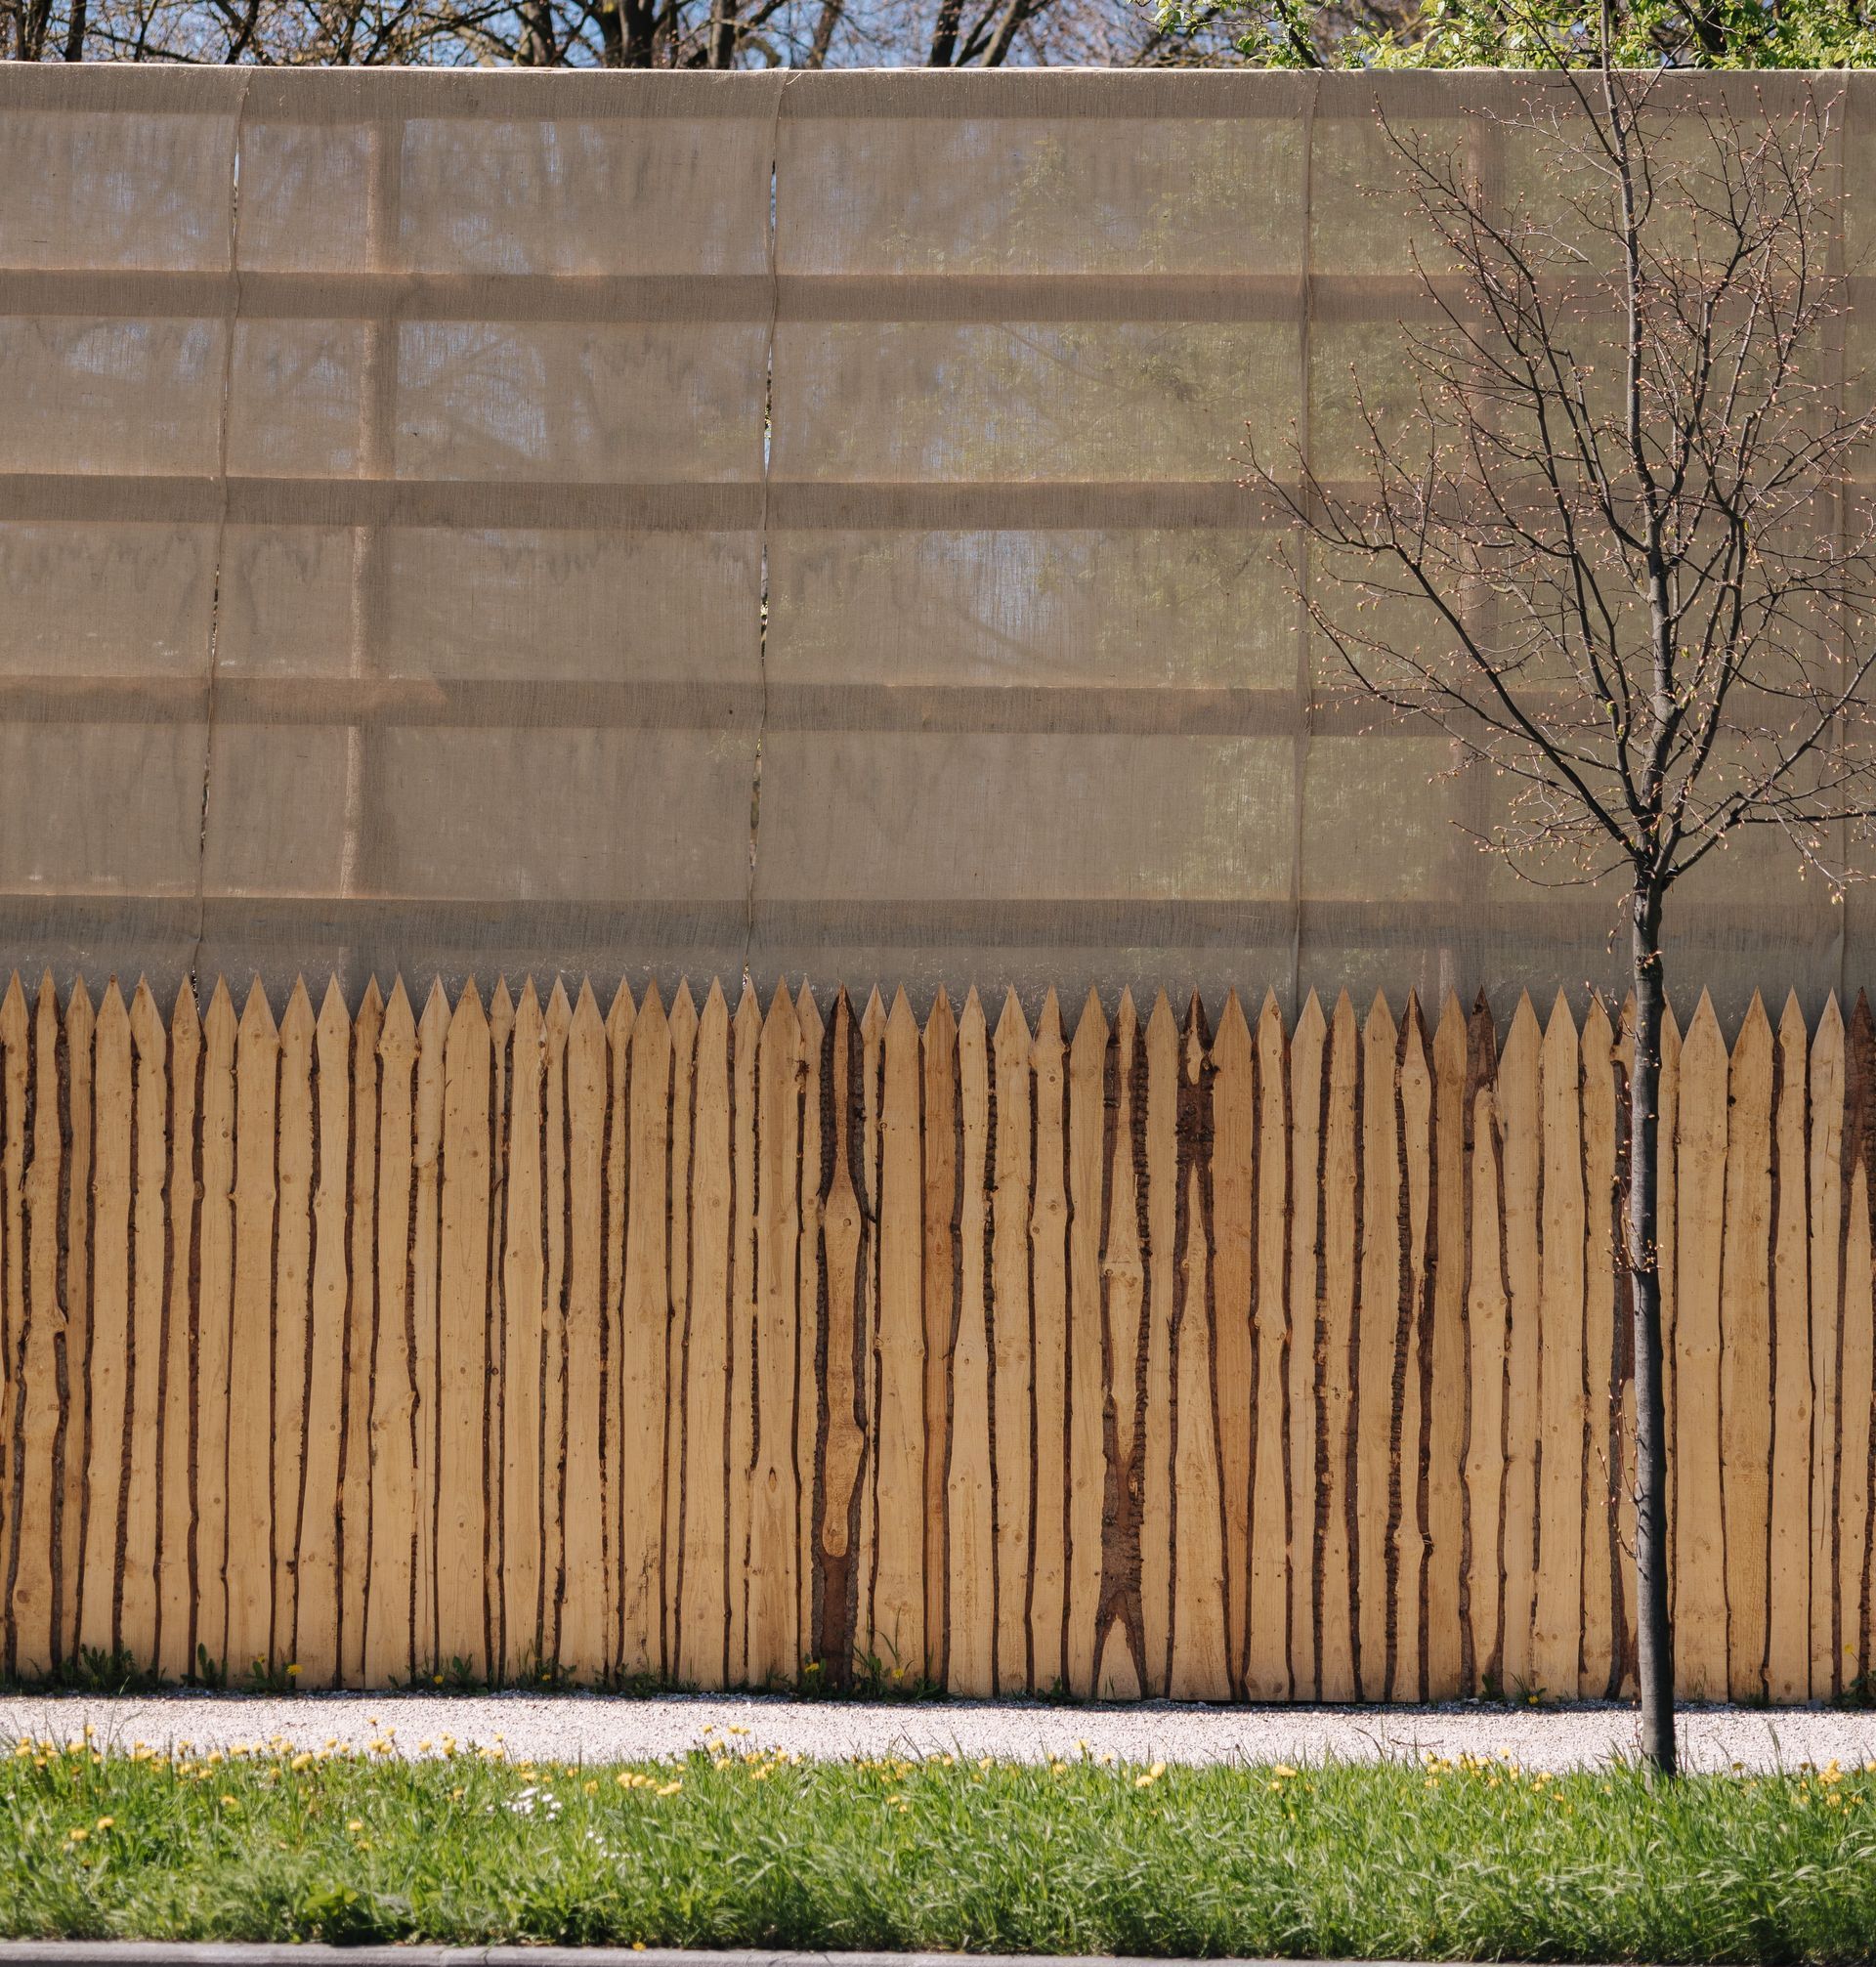 a wooden fence is surrounded by trees on the side of the road .